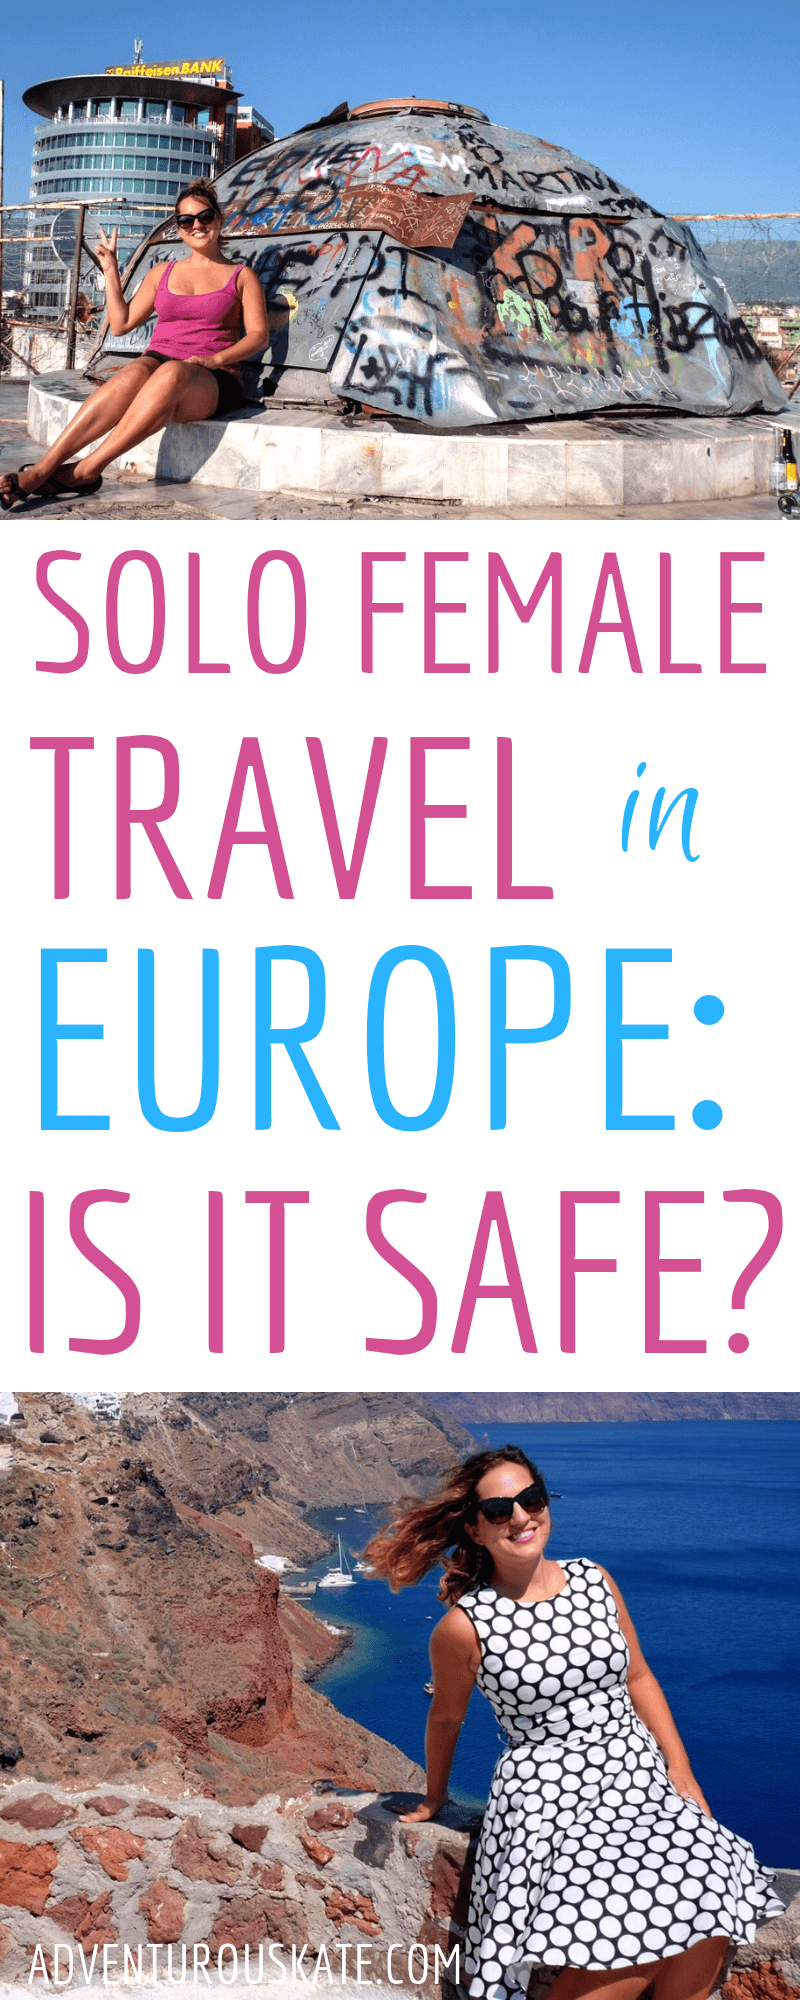 female solo travel europe itinerary